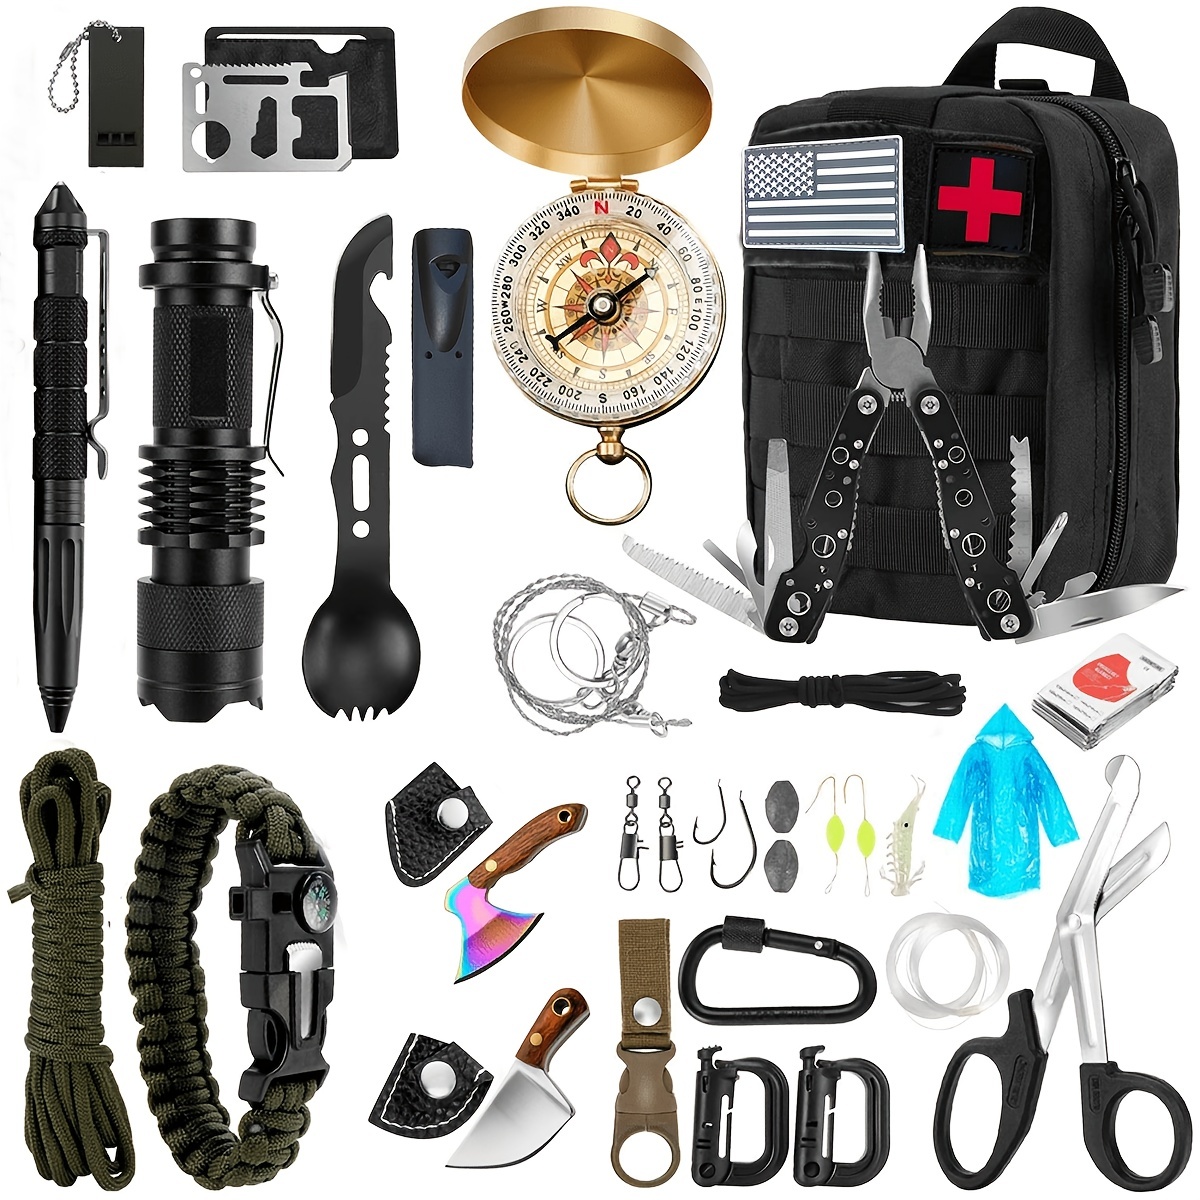 Professional Camping Survival Gear Kit 32 in 1 Tactical First Aid Supplies  Tools for Outdoor Fishing Hiking Hunting Adventures